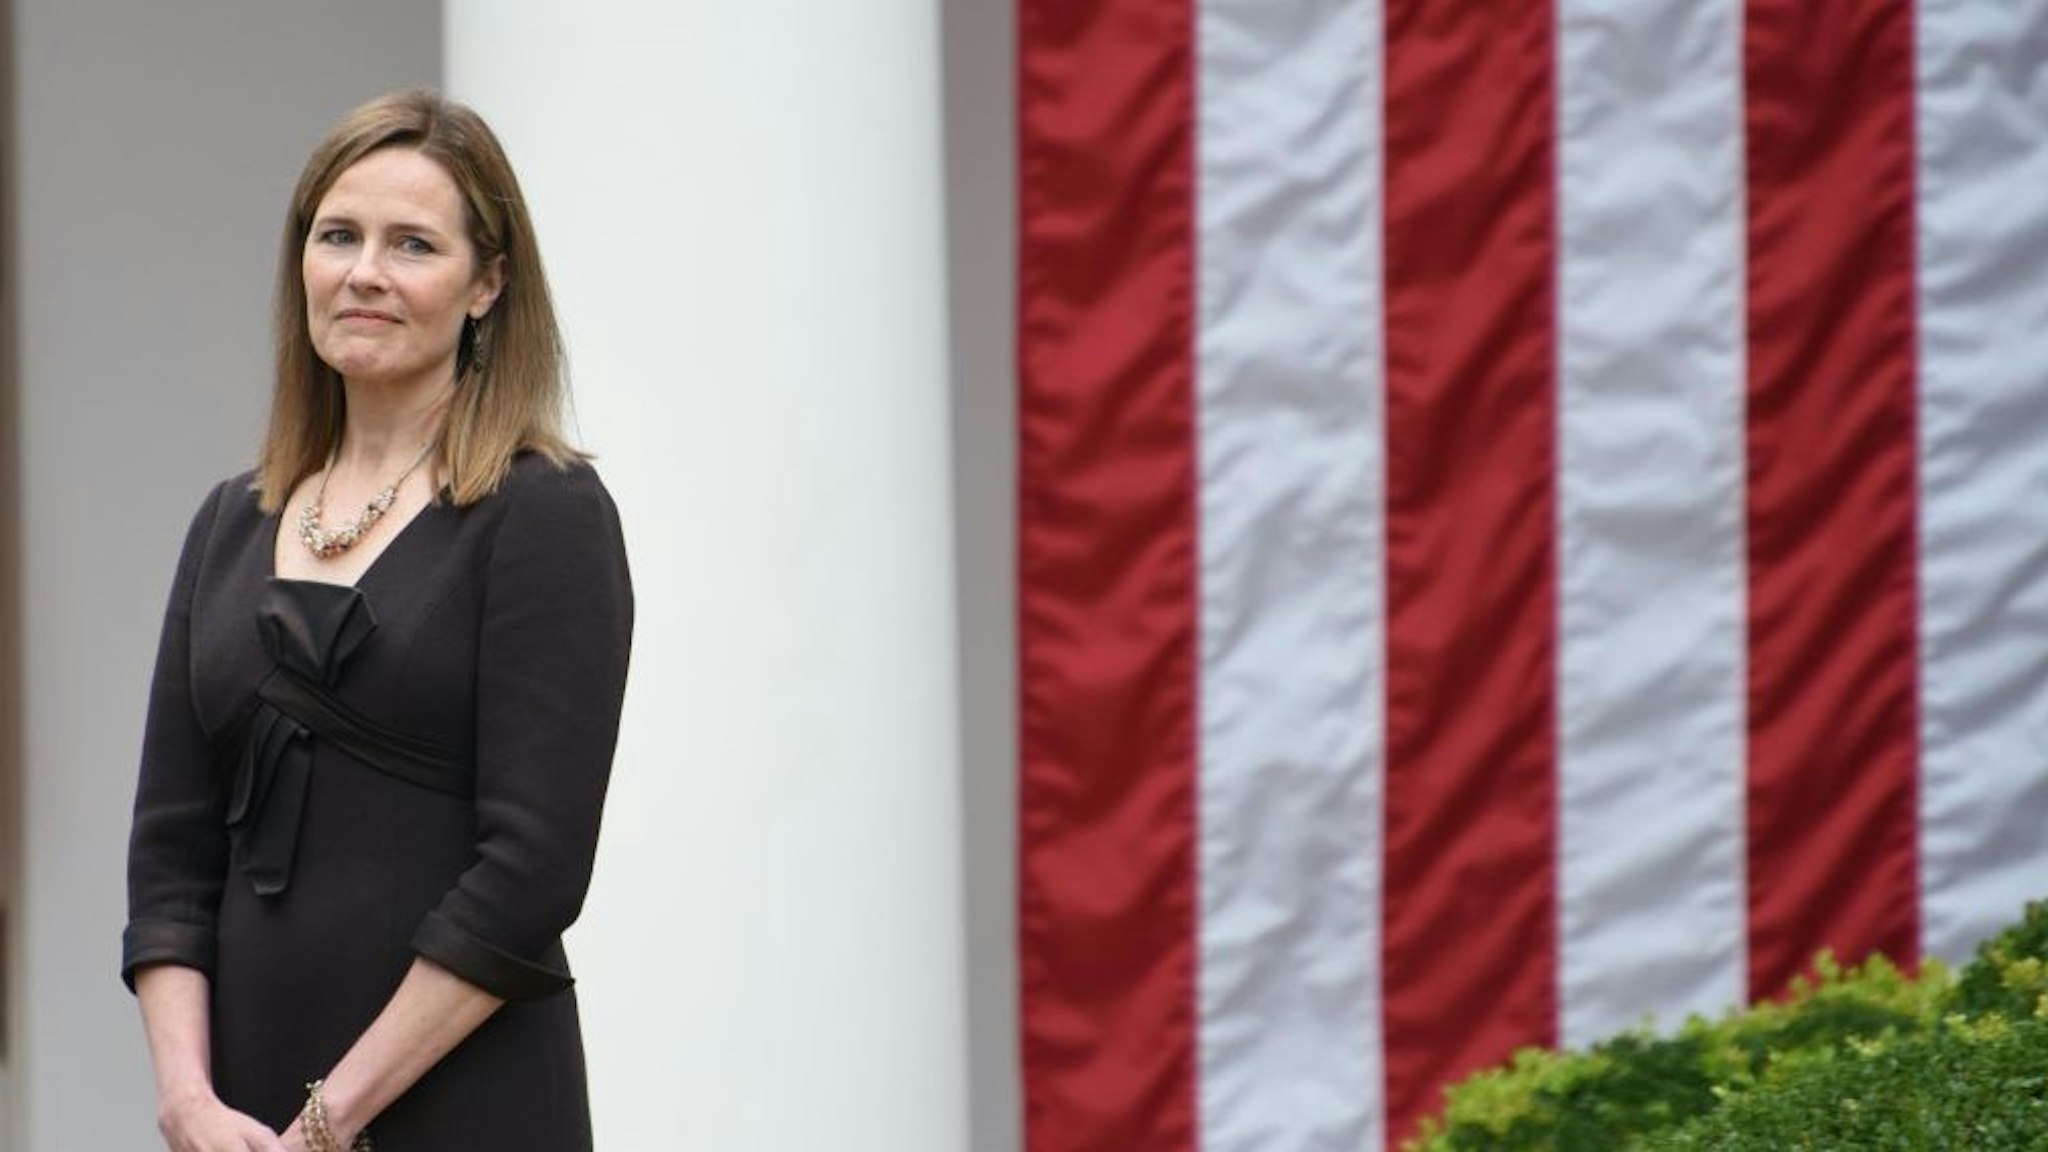 WASHINGTON, DC - SEPTEMBER 26: Amy Coney Barrett, U.S. President Donald Trump's nominee for associate justice of the U.S. Supreme Court, attends an announcement ceremony at the White House on September 26, 2020 in Washington, DC. (Photo by